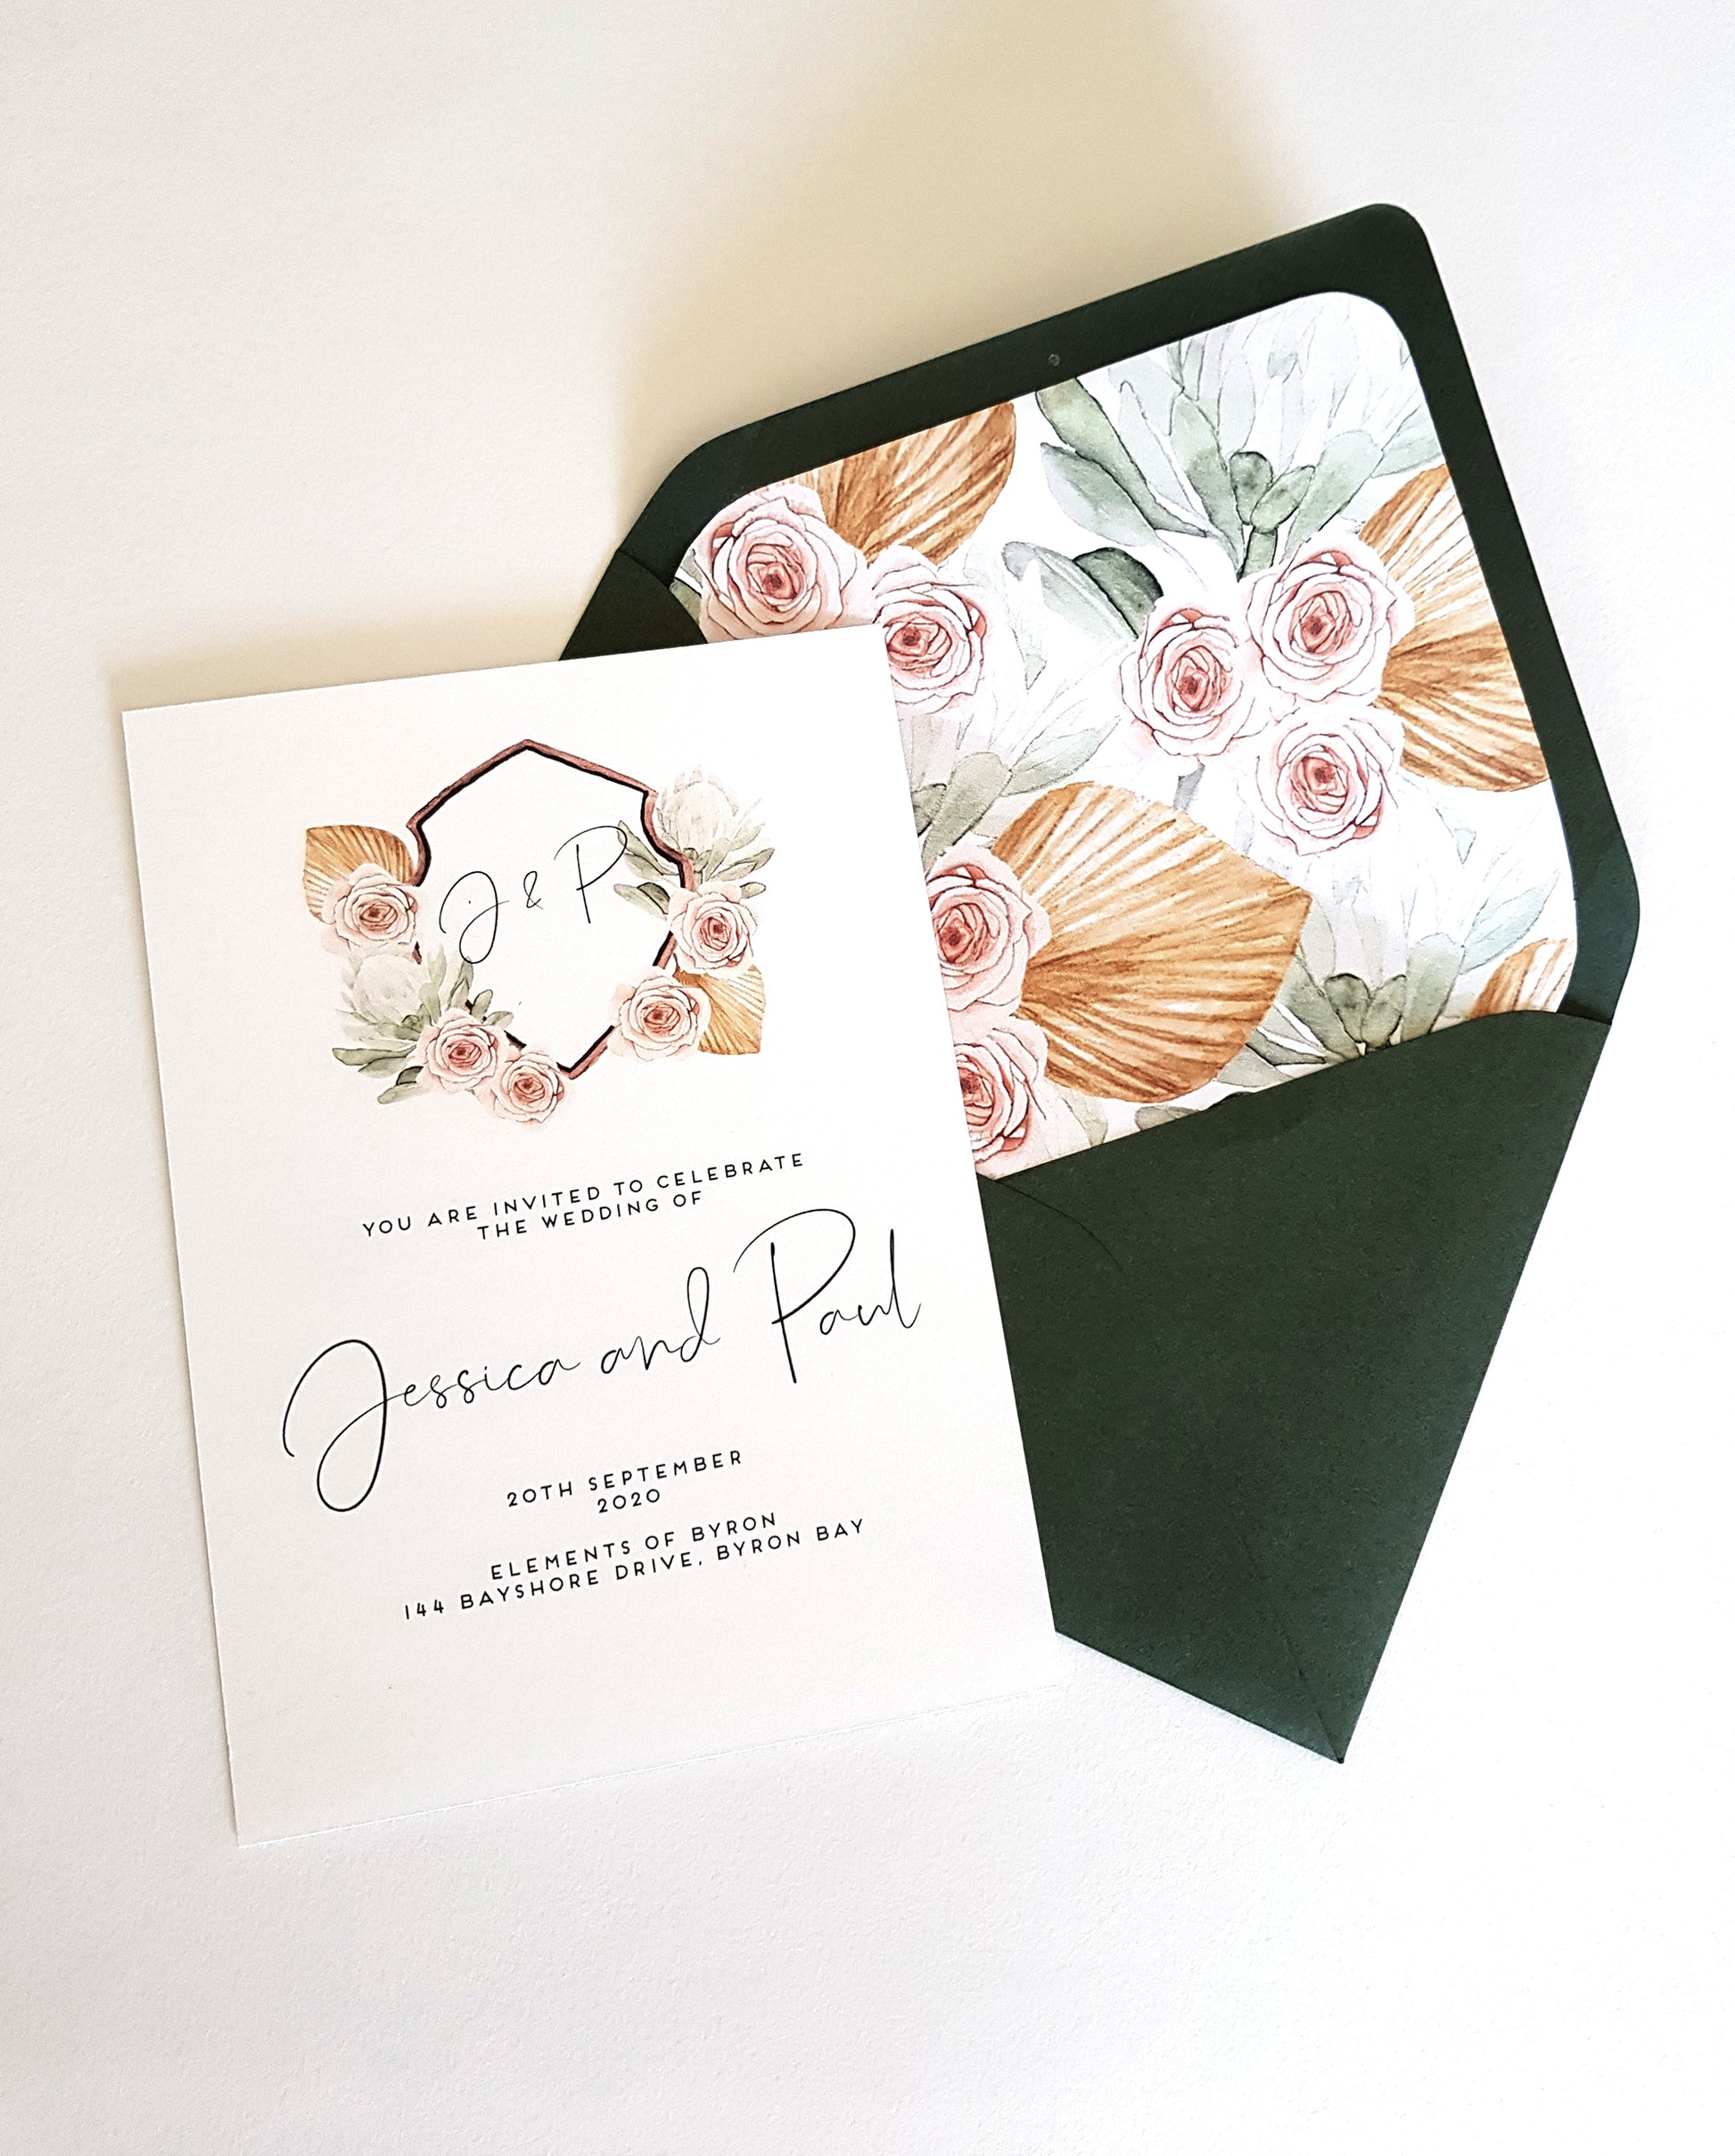 Crest wedding invite design, featuring wild roses in dusty pink, green protea, tan coloured tropical leaves, around a hand painted crest and green envelope